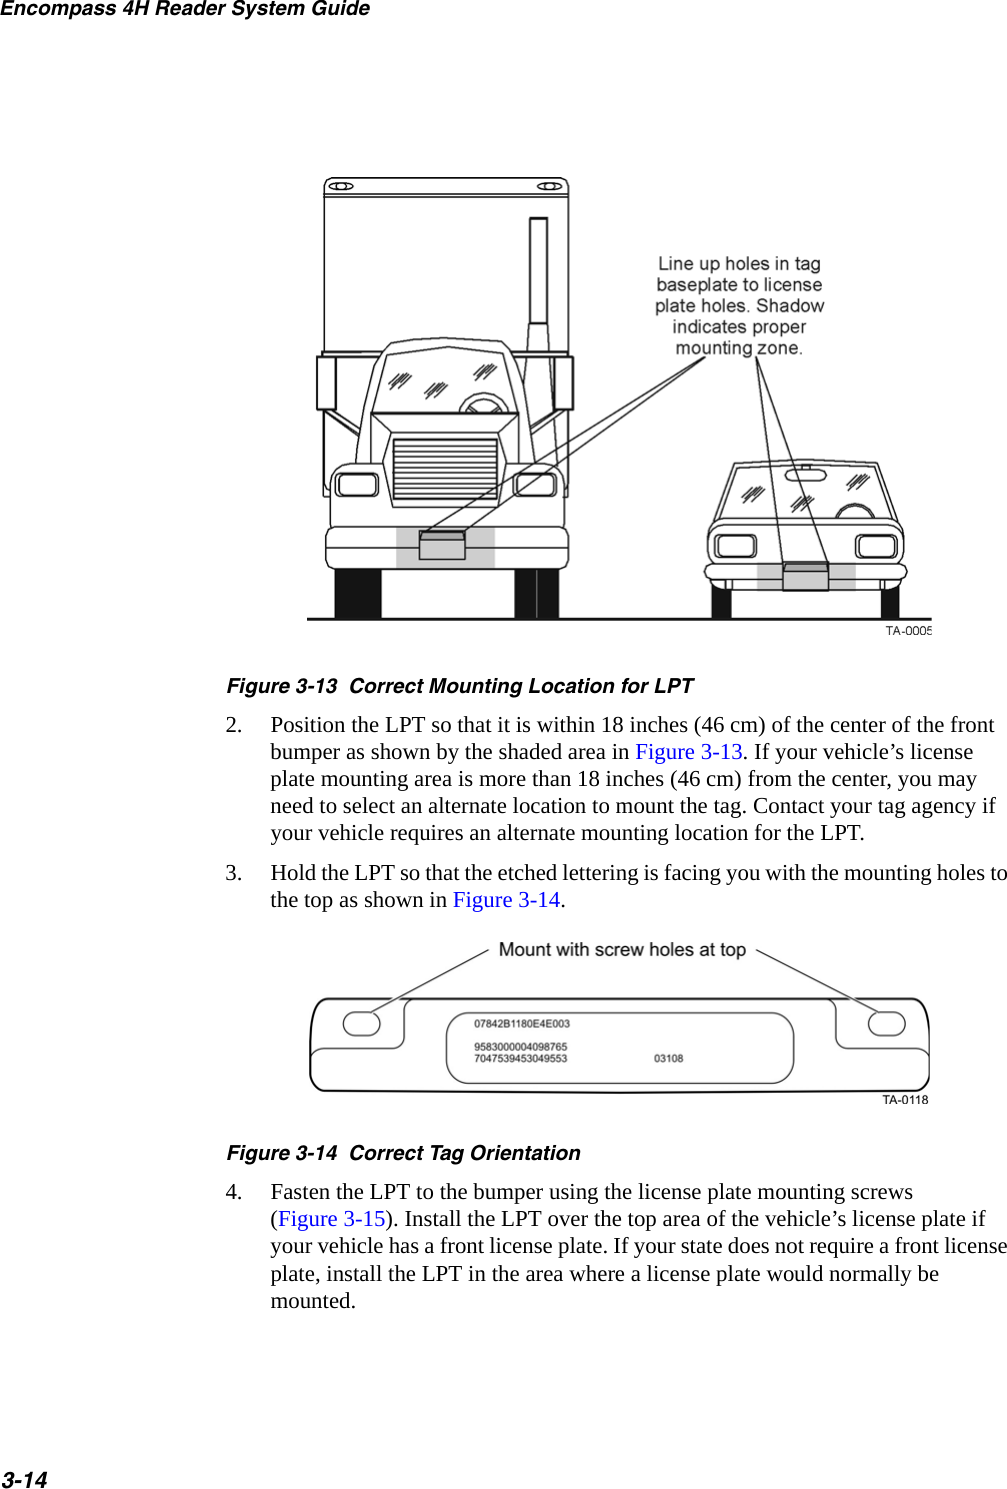 Encompass 4H Reader System Guide3-14Figure 3-13  Correct Mounting Location for LPT2. Position the LPT so that it is within 18 inches (46 cm) of the center of the front bumper as shown by the shaded area in Figure 3-13. If your vehicle’s license plate mounting area is more than 18 inches (46 cm) from the center, you may need to select an alternate location to mount the tag. Contact your tag agency if your vehicle requires an alternate mounting location for the LPT.3. Hold the LPT so that the etched lettering is facing you with the mounting holes to the top as shown in Figure 3-14.Figure 3-14  Correct Tag Orientation4. Fasten the LPT to the bumper using the license plate mounting screws (Figure 3-15). Install the LPT over the top area of the vehicle’s license plate if your vehicle has a front license plate. If your state does not require a front license plate, install the LPT in the area where a license plate would normally be mounted.